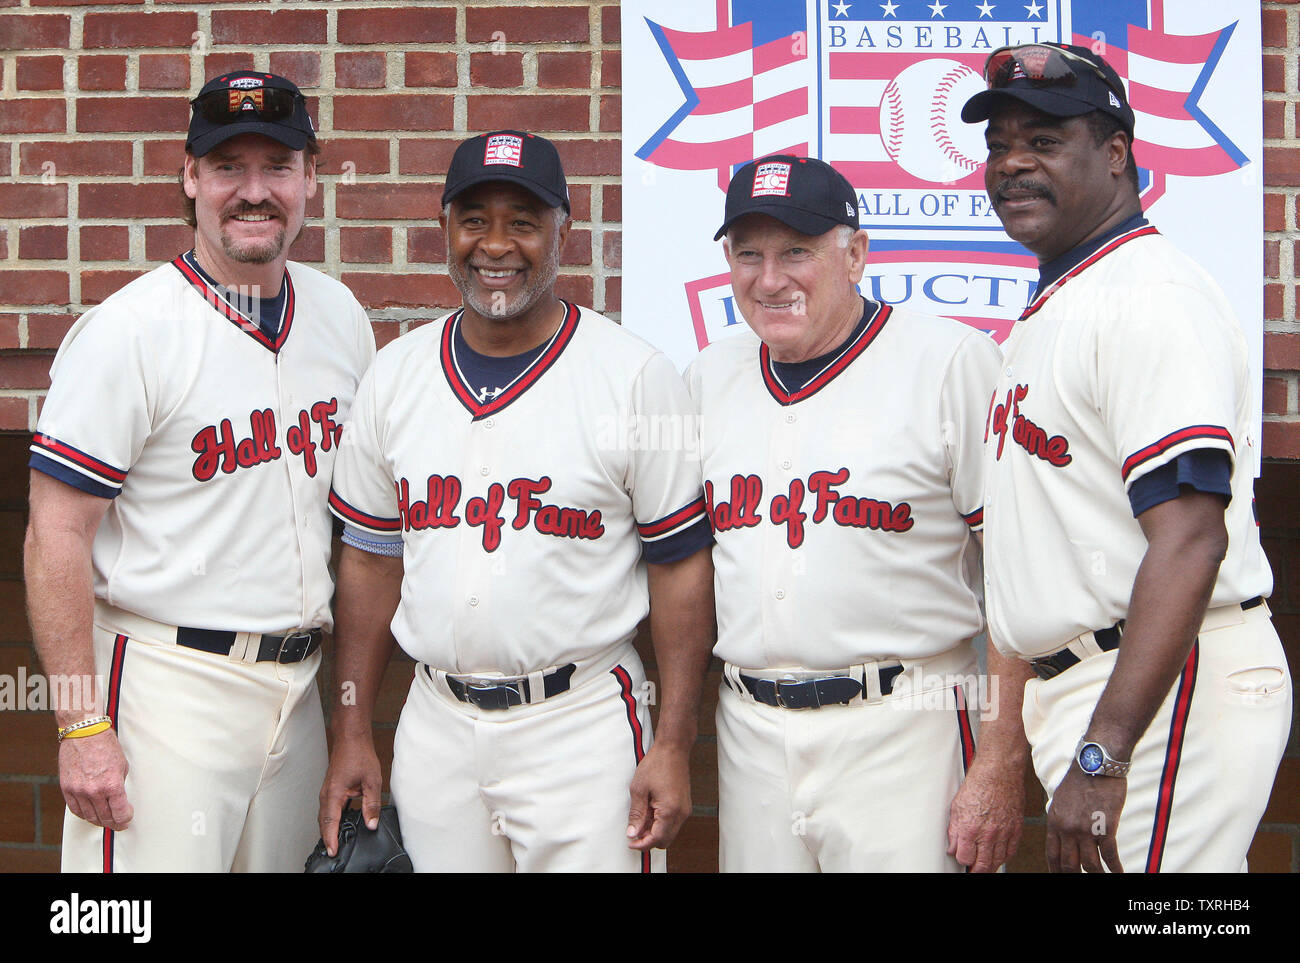 Members of the National Baseball Hall of Fame (L to R) Wade Boggs, Ozzie Smith, Harmon Killebrew and Eddie Murray pose together for a photograph following their participation in 'Play Ball,' during Induction week in Cooperstown, New York on July 24, 2009. Former players Rickey Henderson, Jim Rice and Joe Gordon will be welcomed into the hall as the Class of 2009 on July 26. (UPI Photo/Bill Greenblatt) Stock Photo